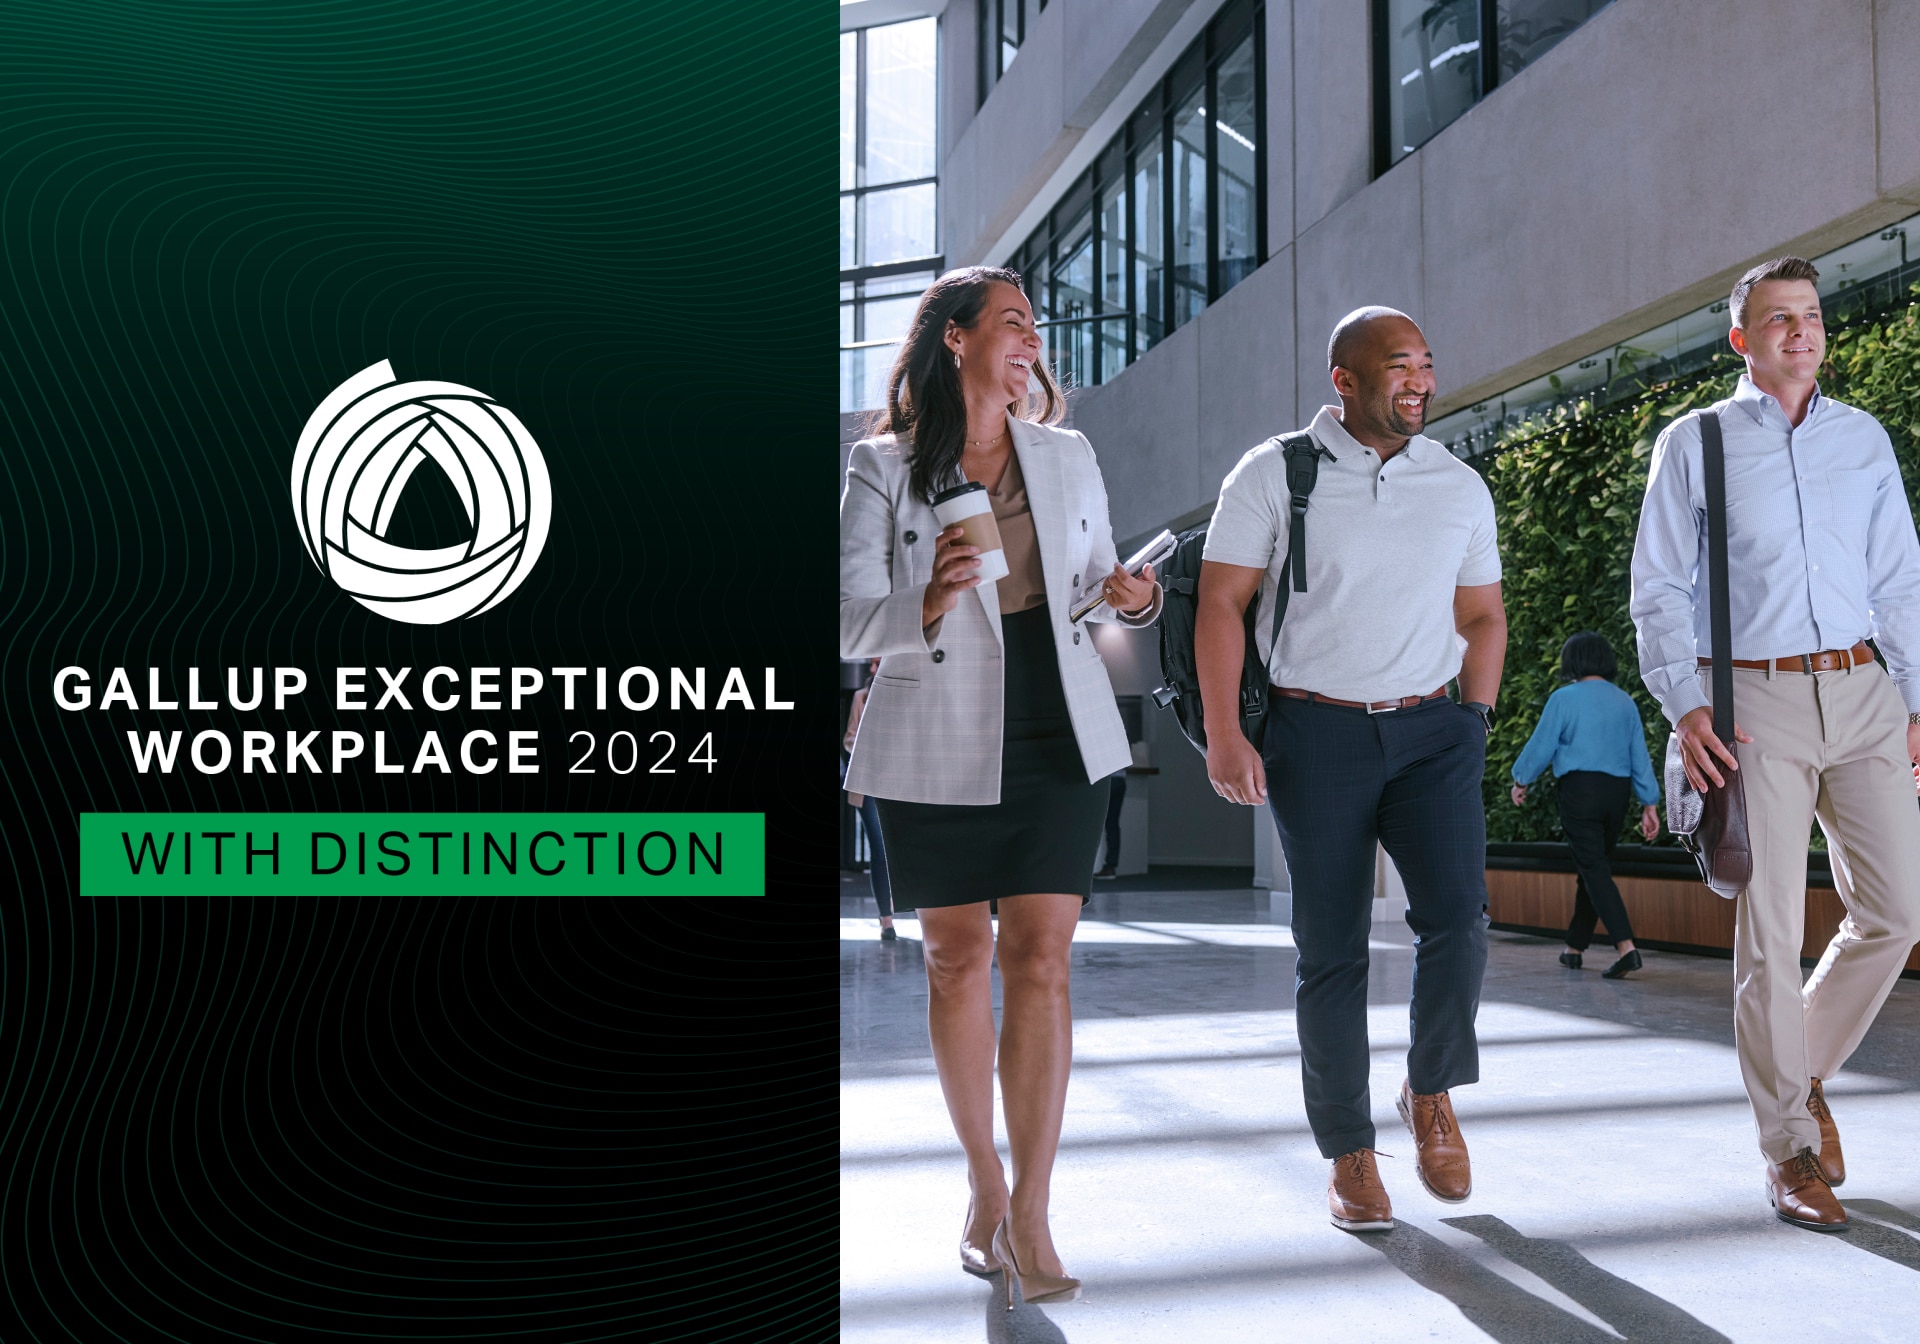 Enterprise Mobility Named 2024 Gallup Exceptional Workplace Award Winner With Distinction